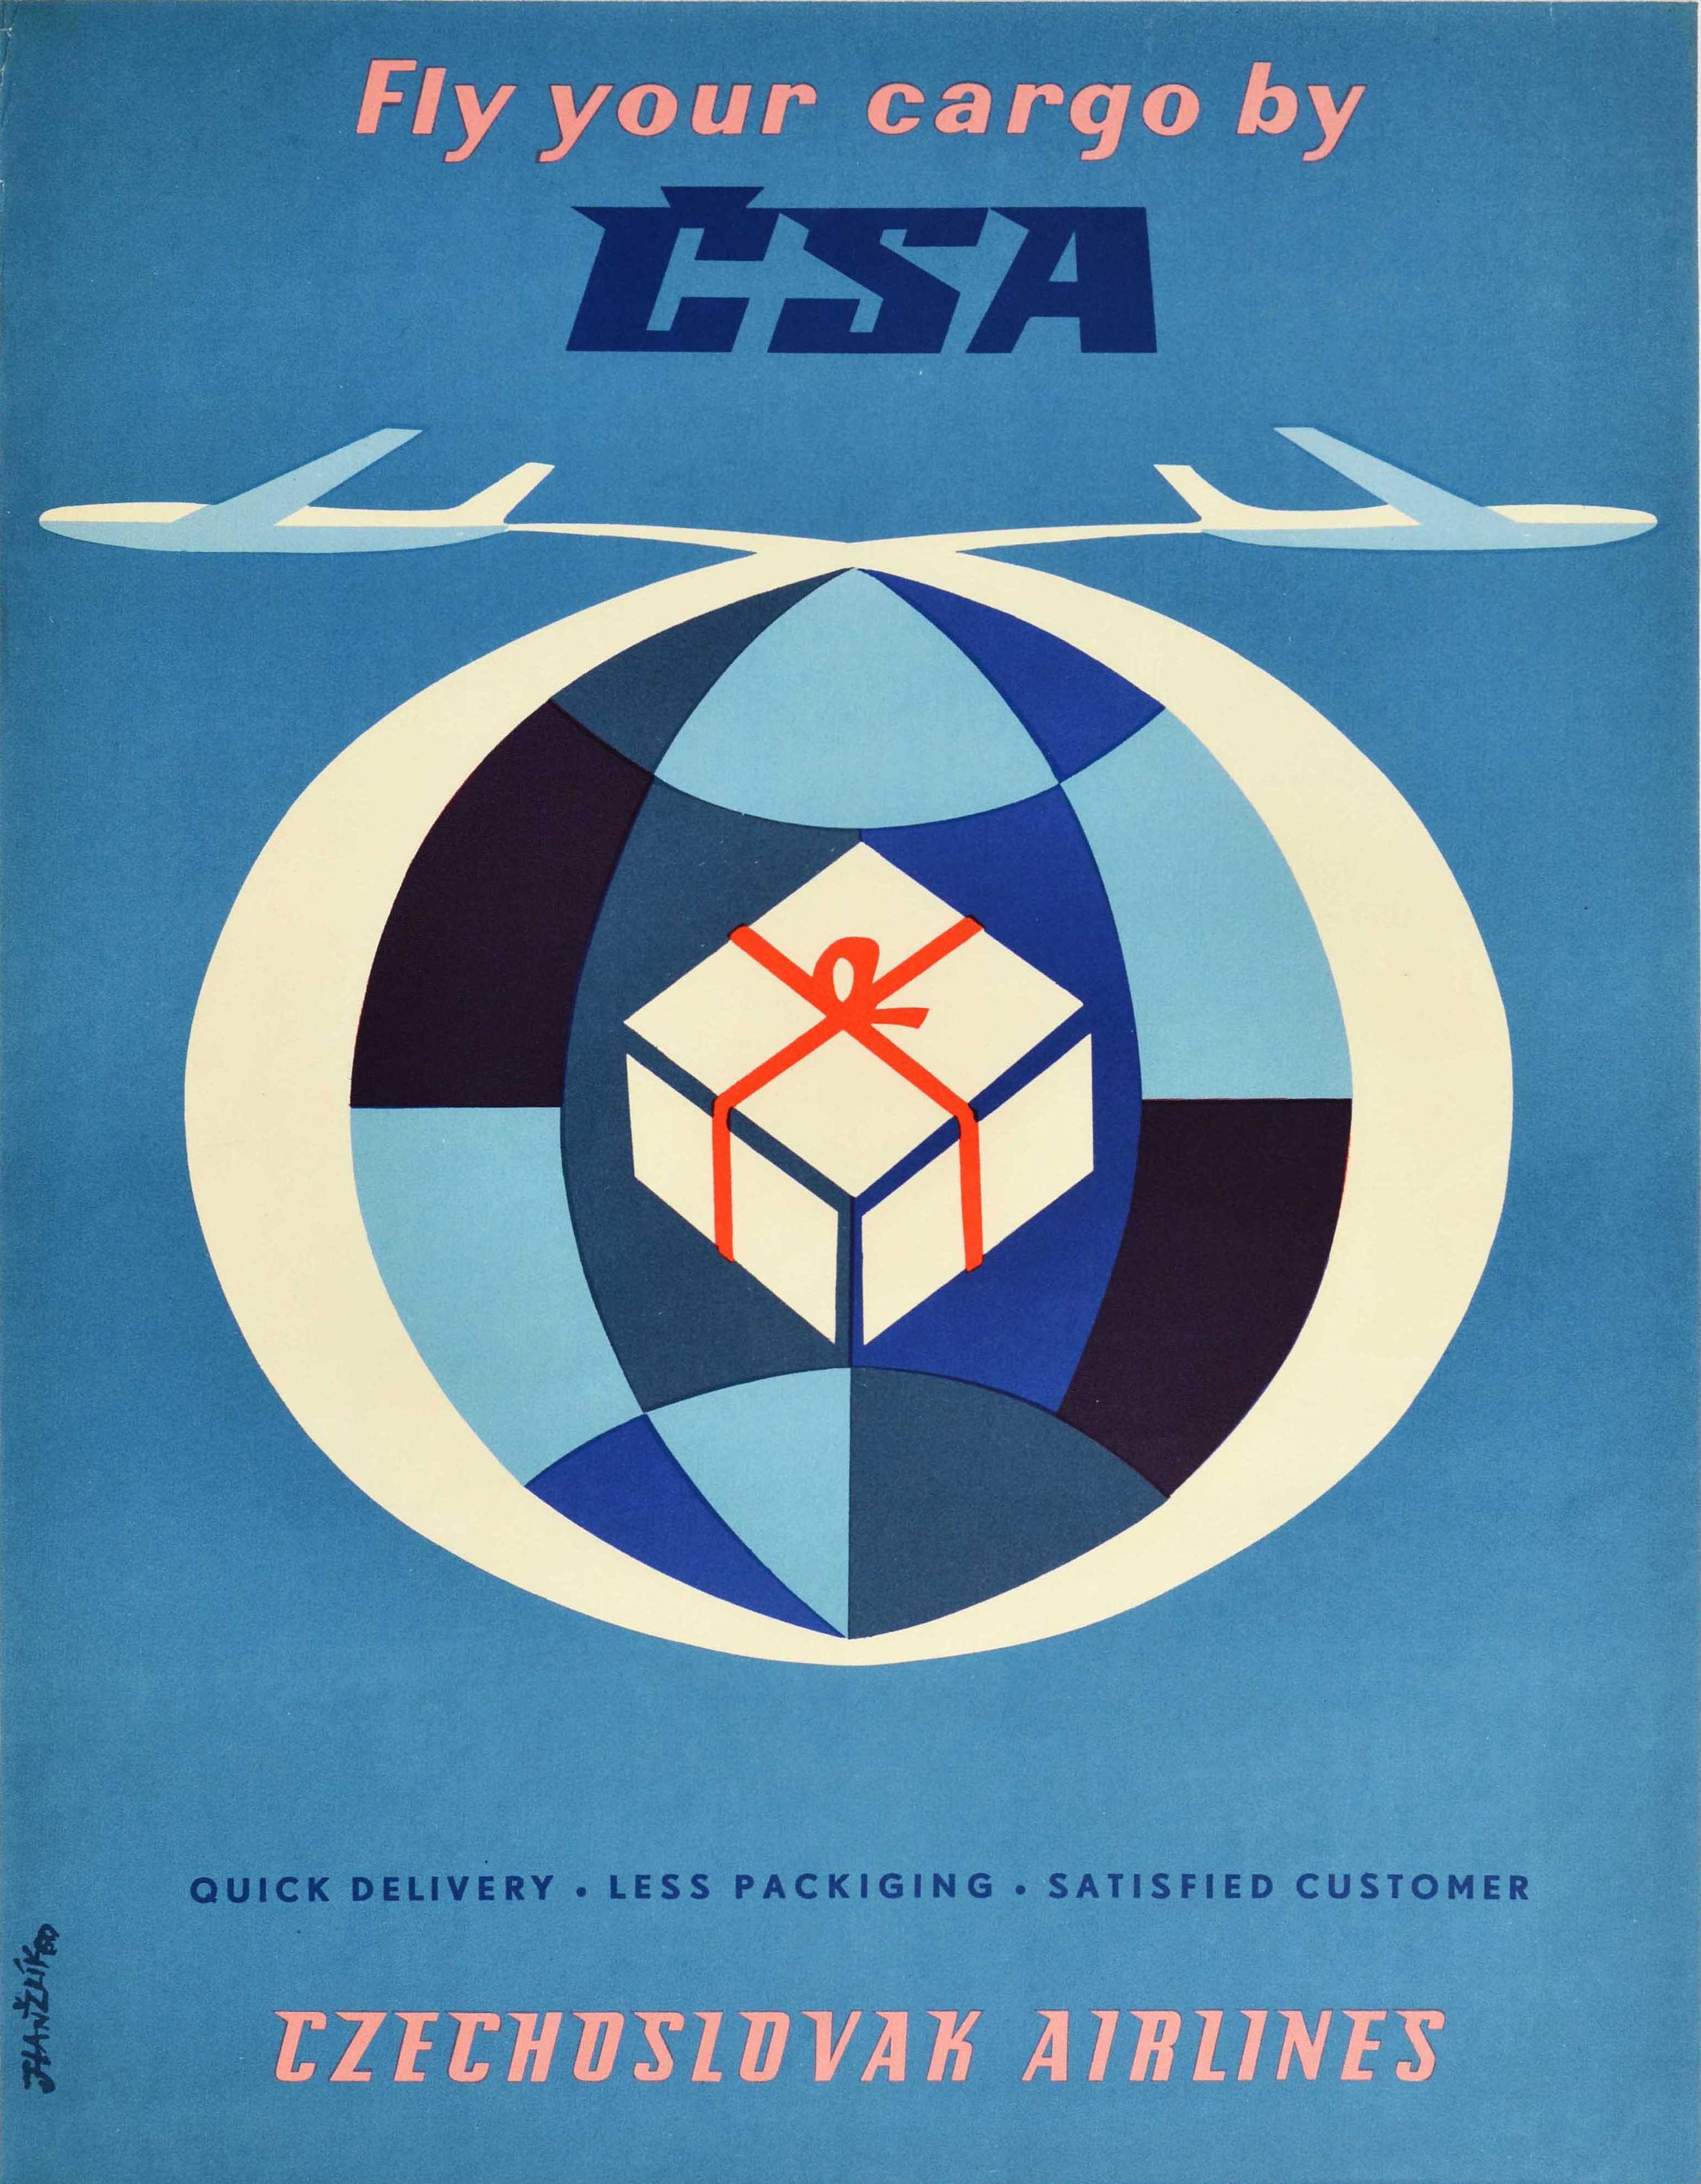 Unknown Print - Original Vintage Advertising Poster Fly Your Cargo By CSA Czechoslovak Airlines